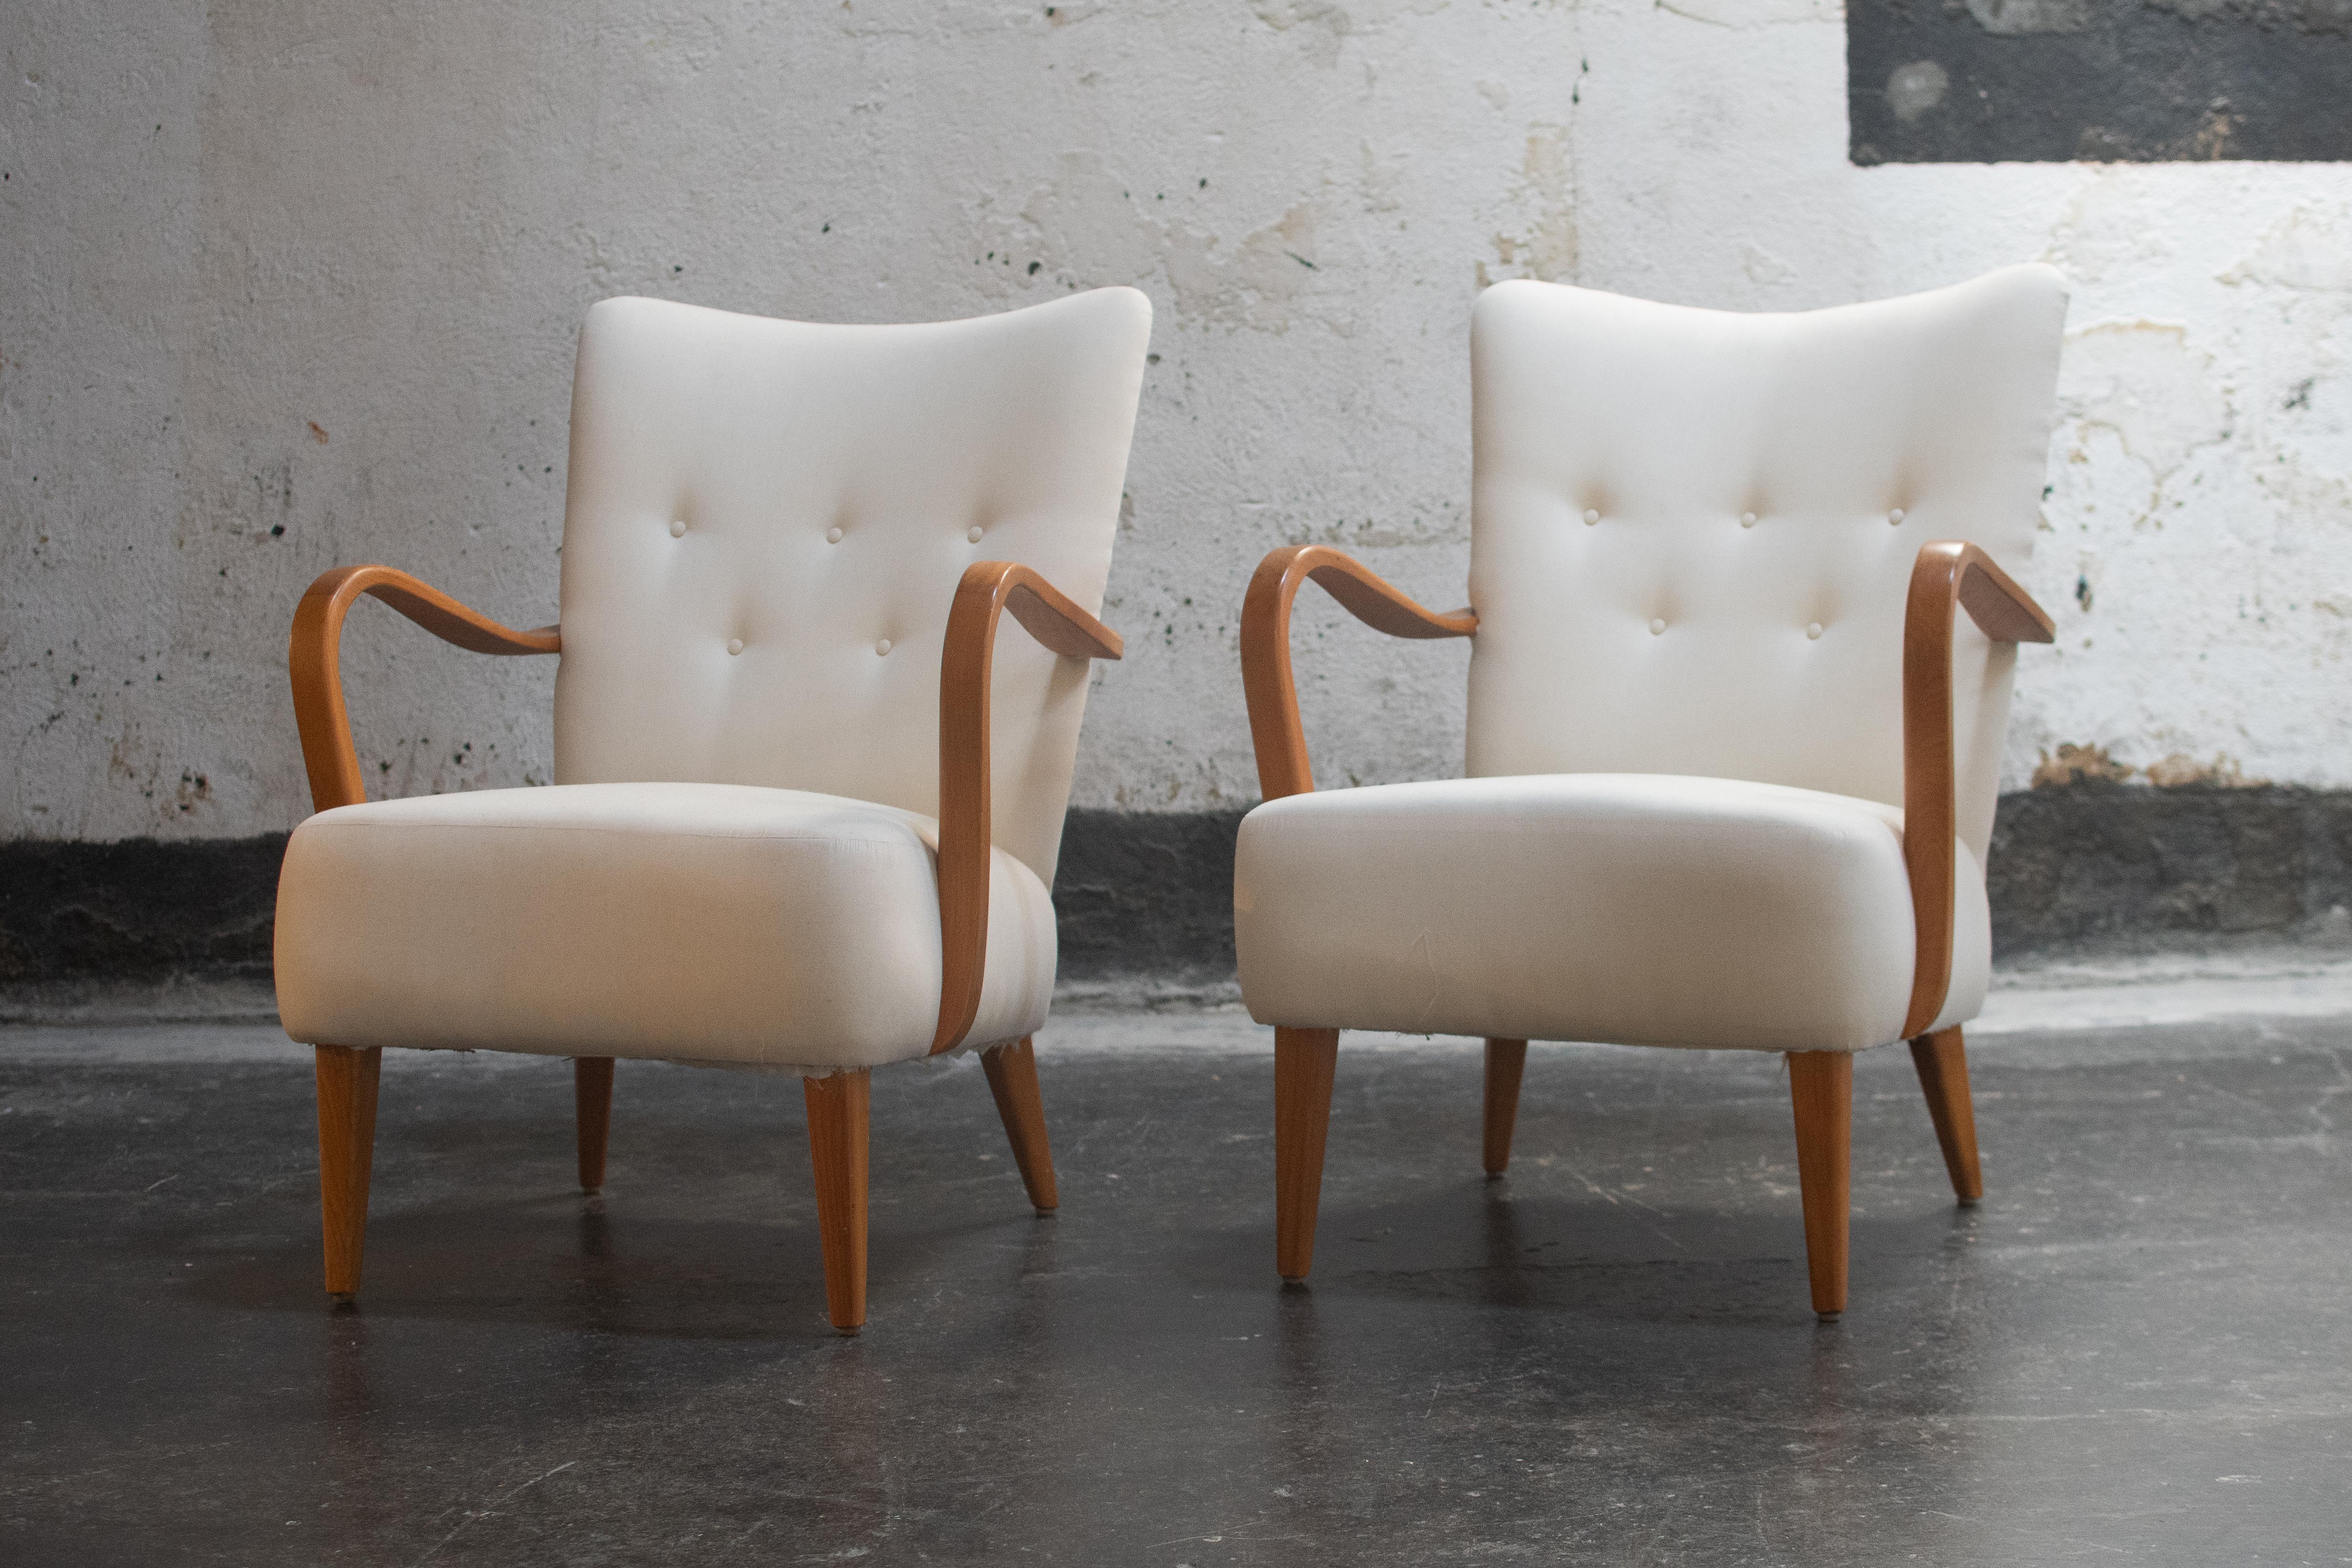 This pair of Scandinavian Modern bentwood birch arm chairs have been fully restored and are ready to be reupholstered. Scandinavian interiors often have very low ceilings to contain heat, seating tends to be diminutive in footprint  but is